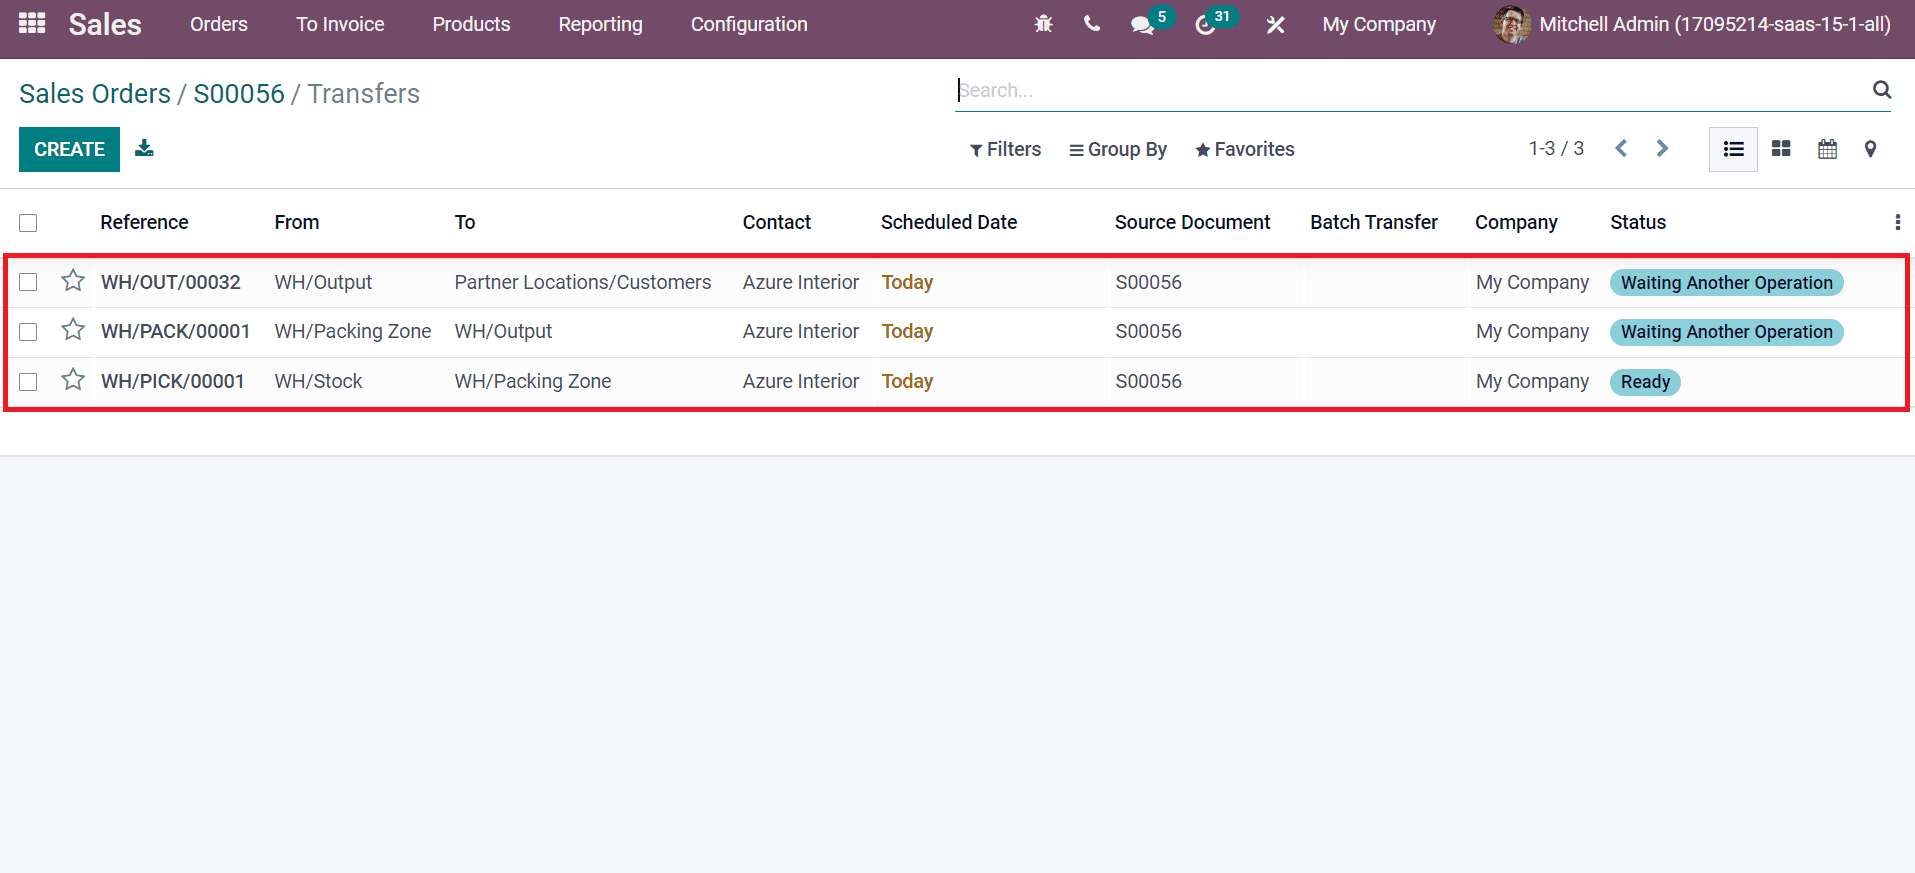 how-to-manage-delivery-orders-using-odoo-15-inventory-cybrosys